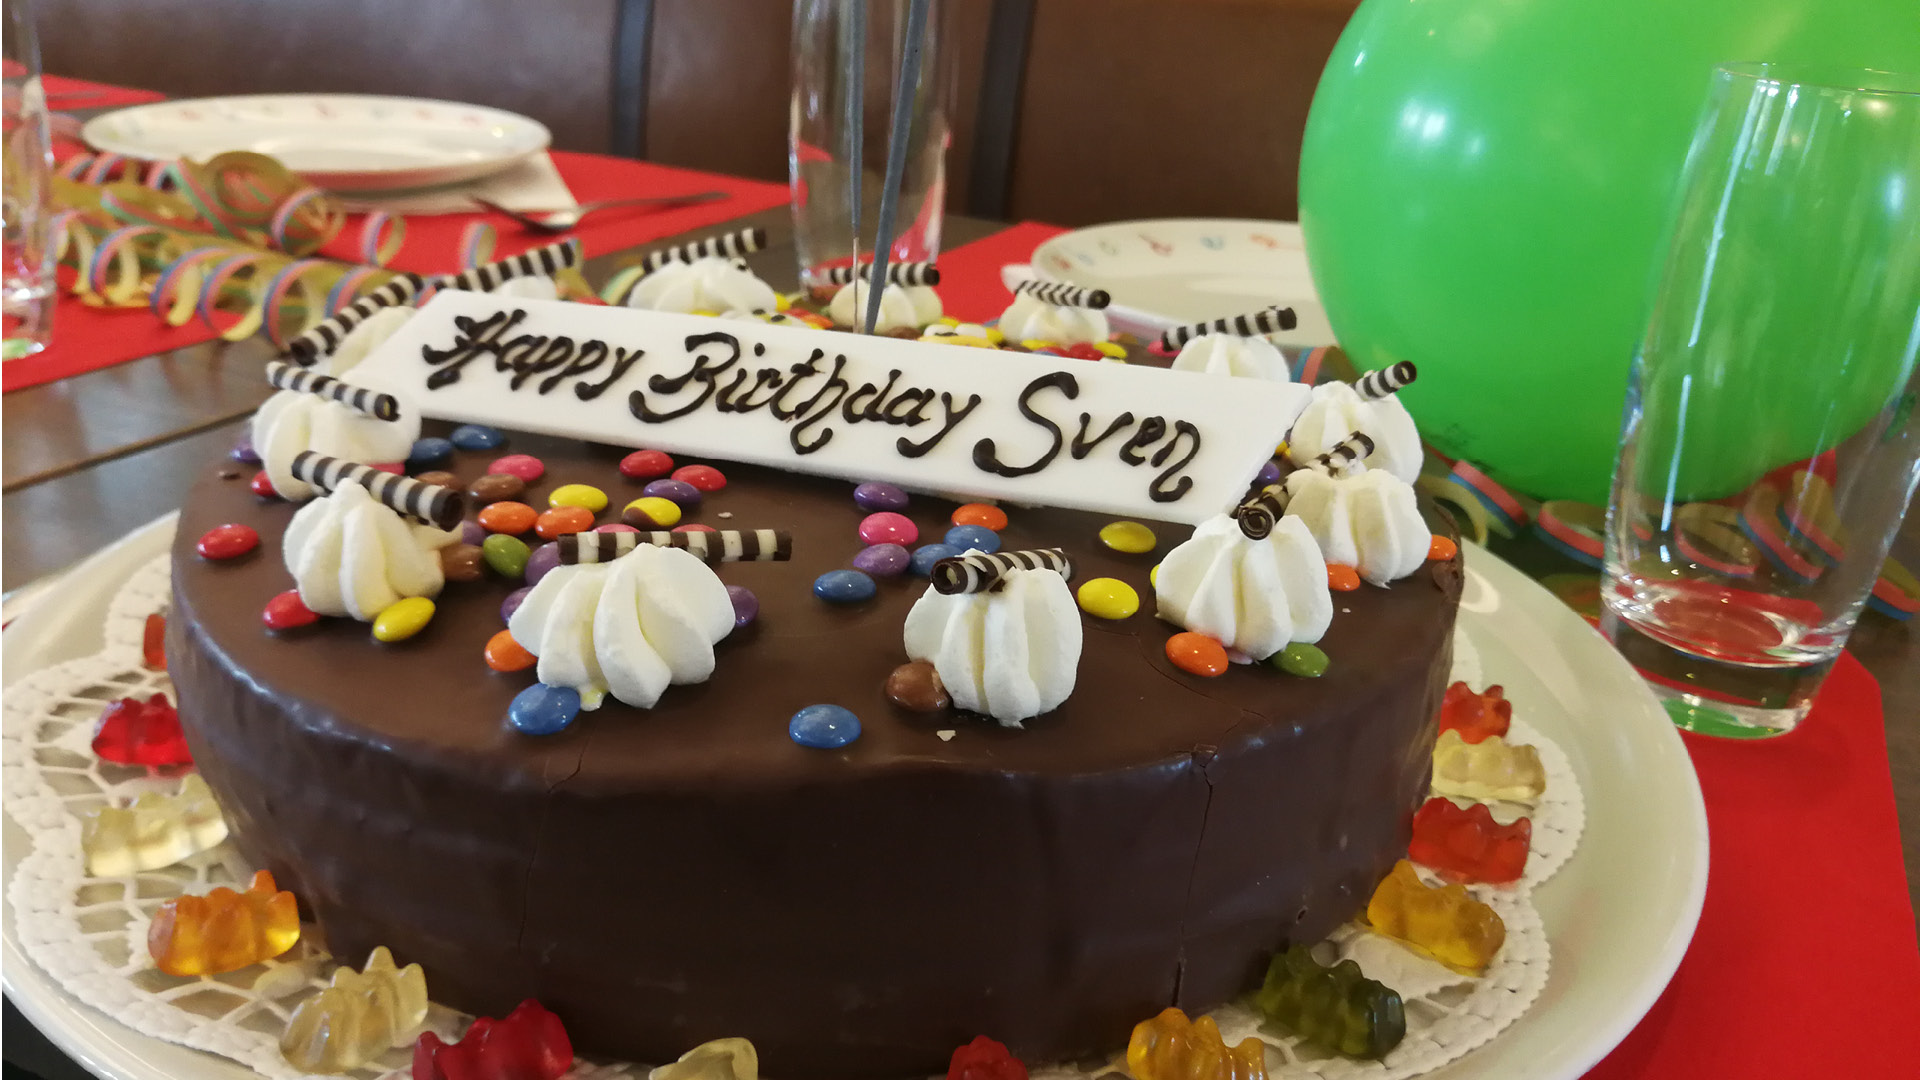 Chocolate birthday cake for a children's party